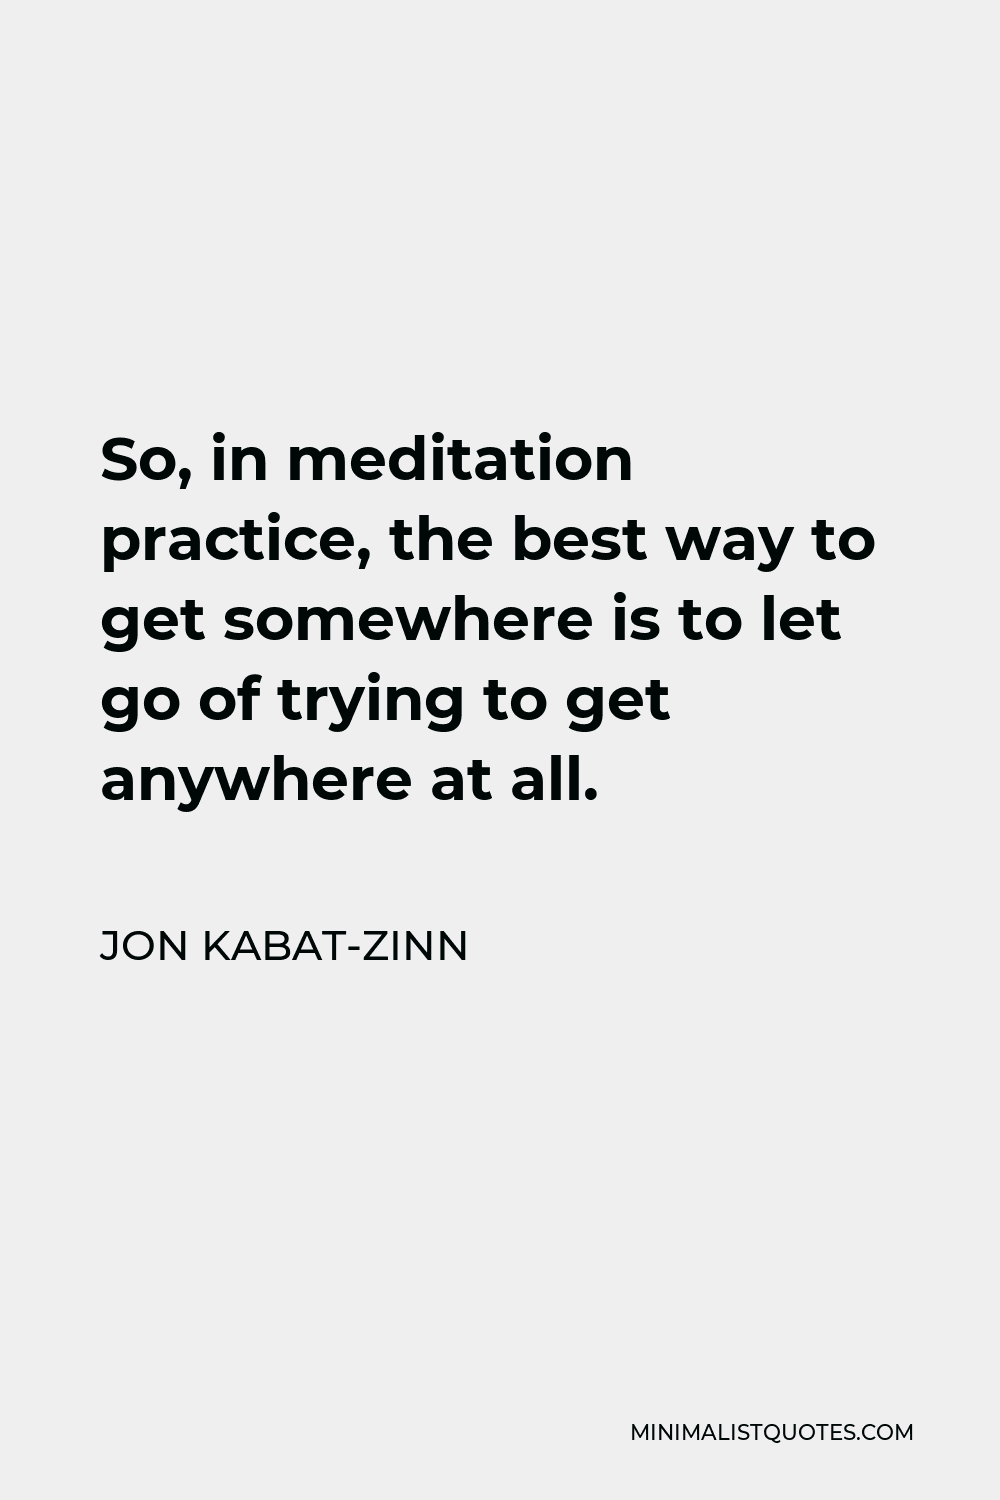 Jon Kabat-Zinn Quote - So, in meditation practice, the best way to get somewhere is to let go of trying to get anywhere at all.